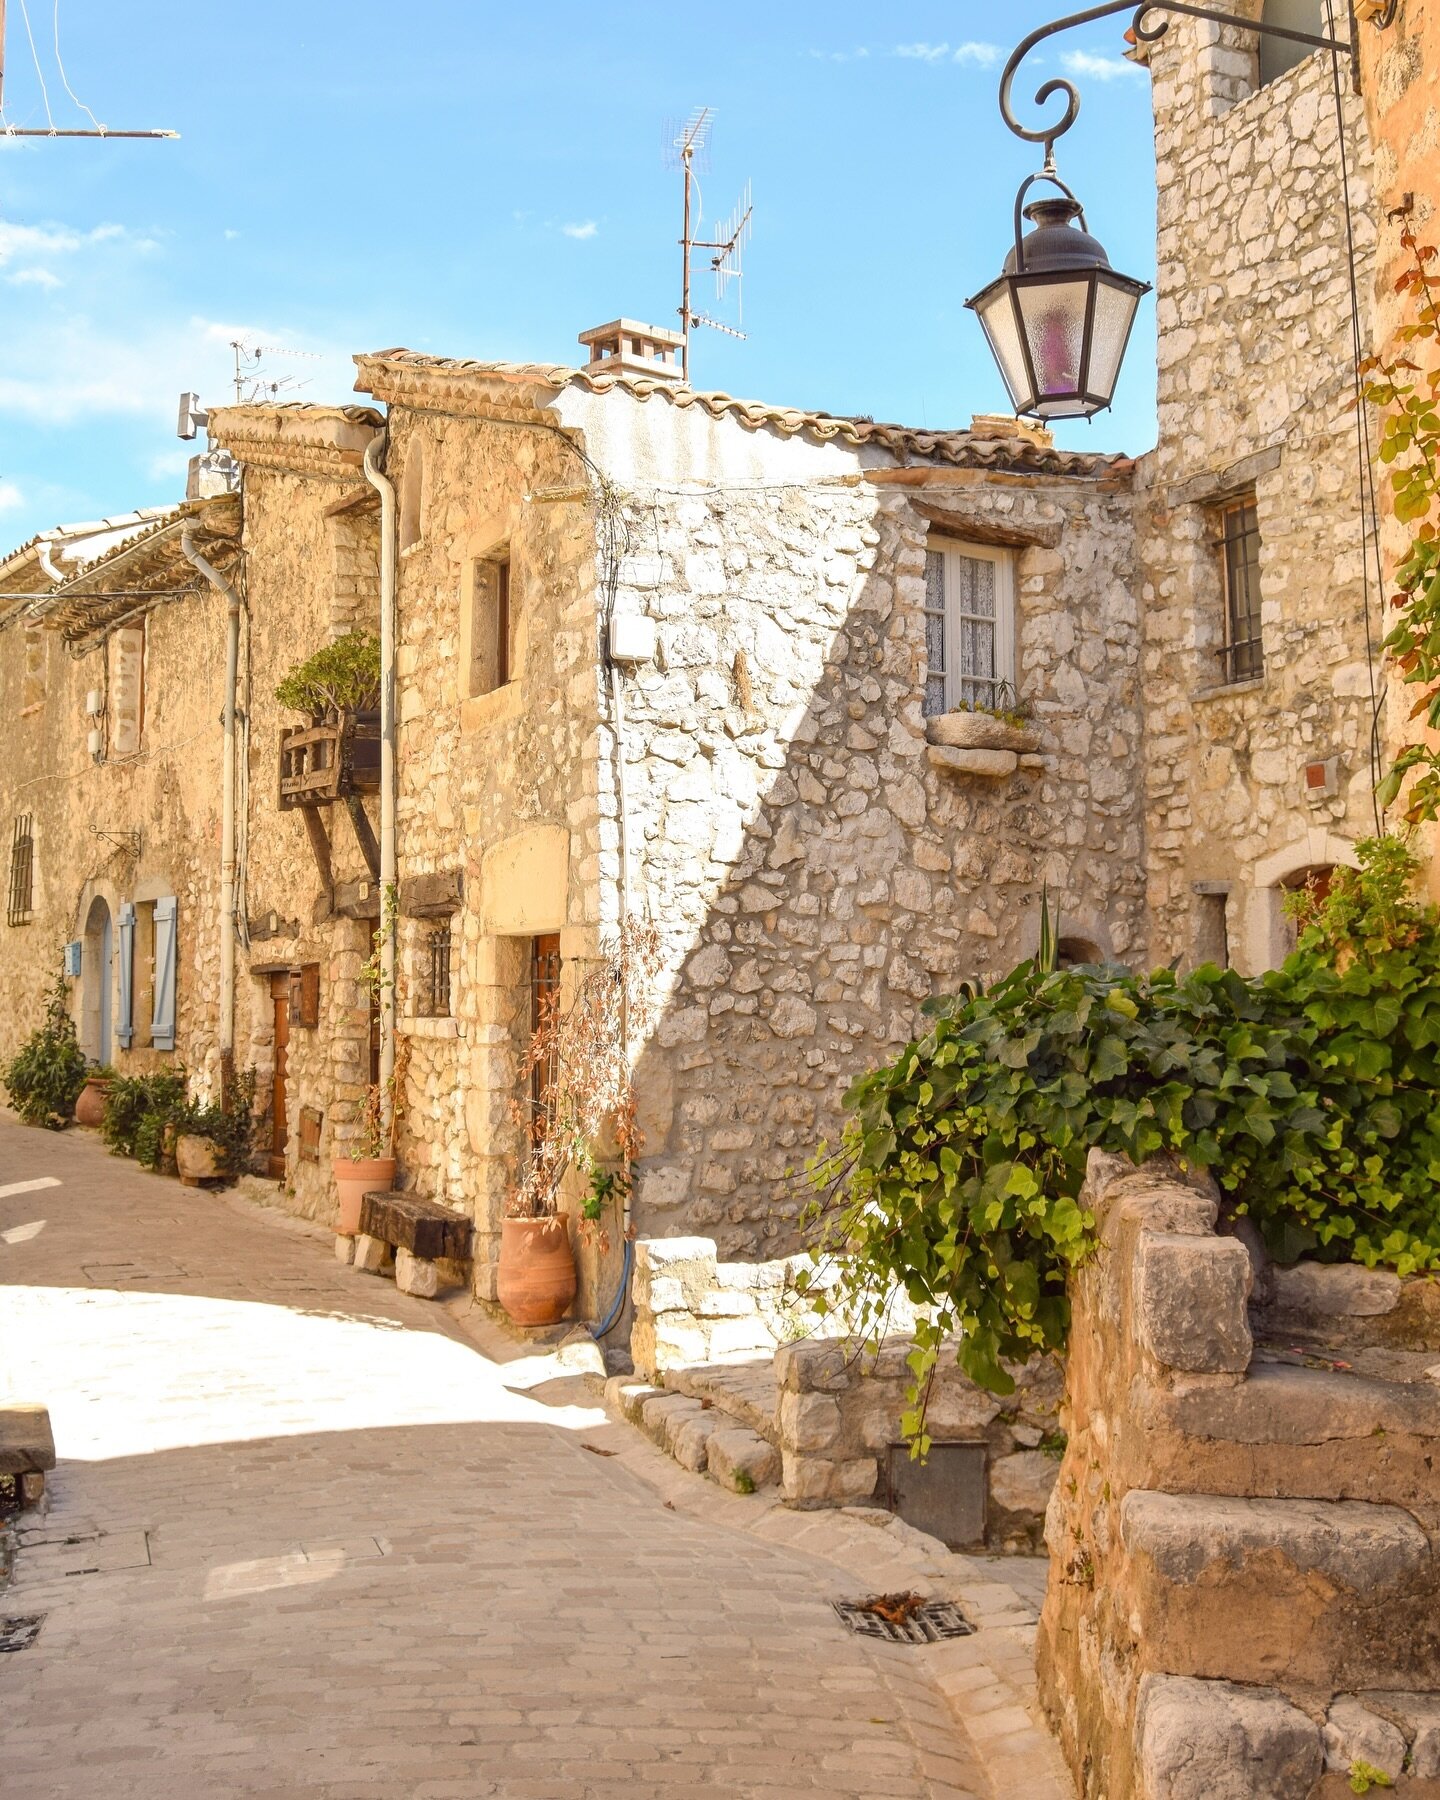 Tourrettes-sur-Loup is such a pretty medieval artist&rsquo;s village in Provence perched between Grasse &amp; Vence. Every corner I turned I had to take a dozen photos to try to capture the charm which dates back to the 16th century! ⚜️

If you are w